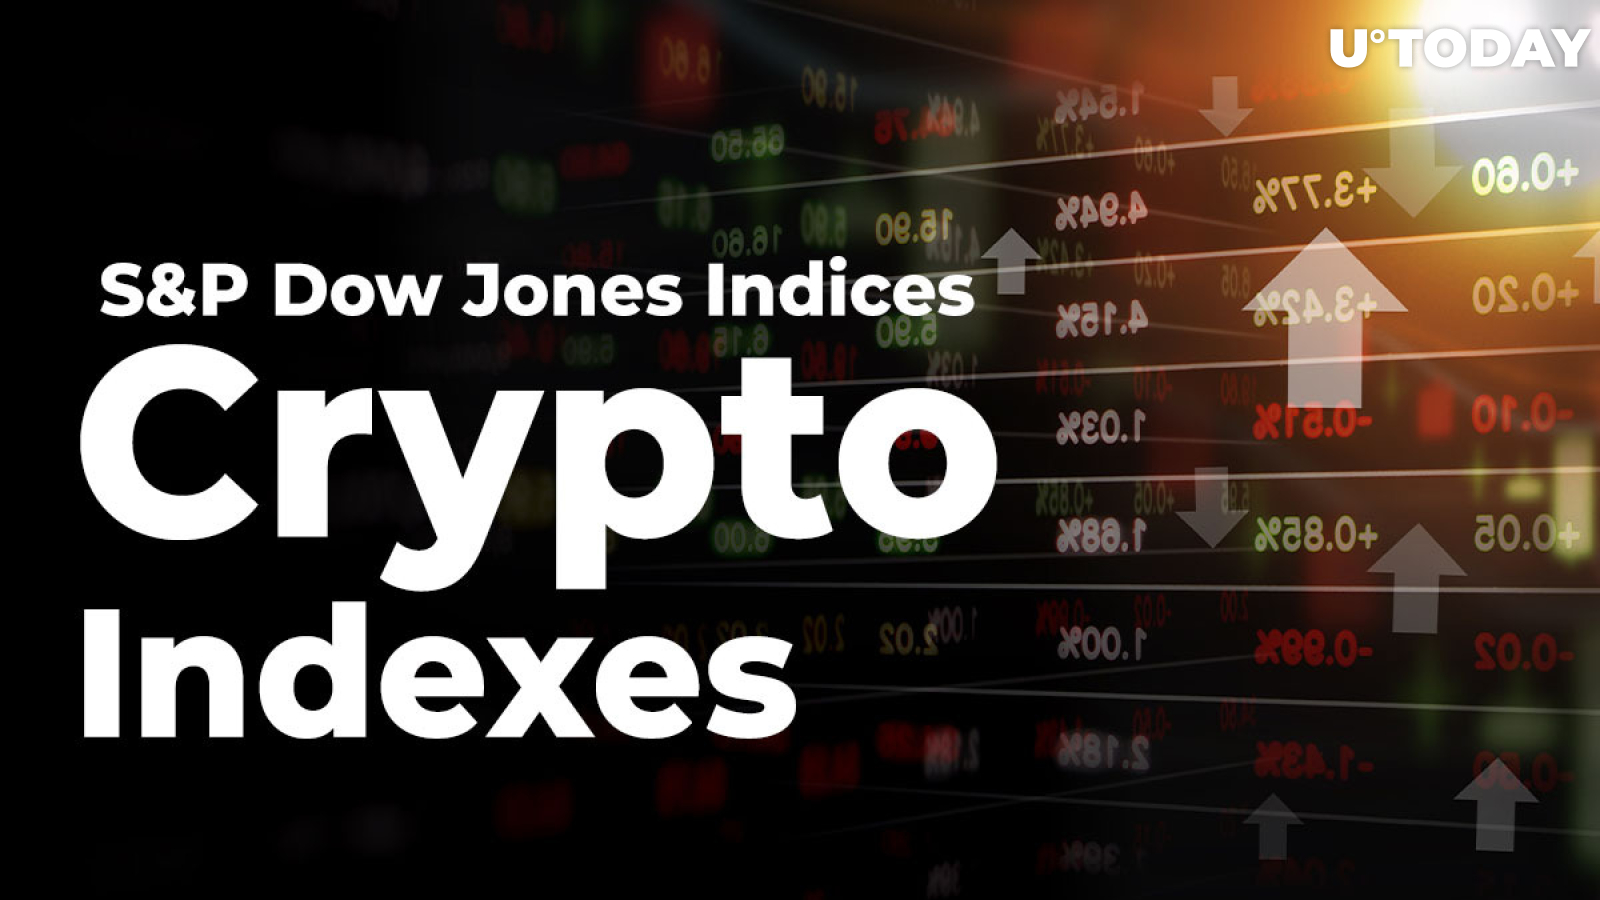 S&P Dow Jones Indices to Release Crypto Indexes in 2021